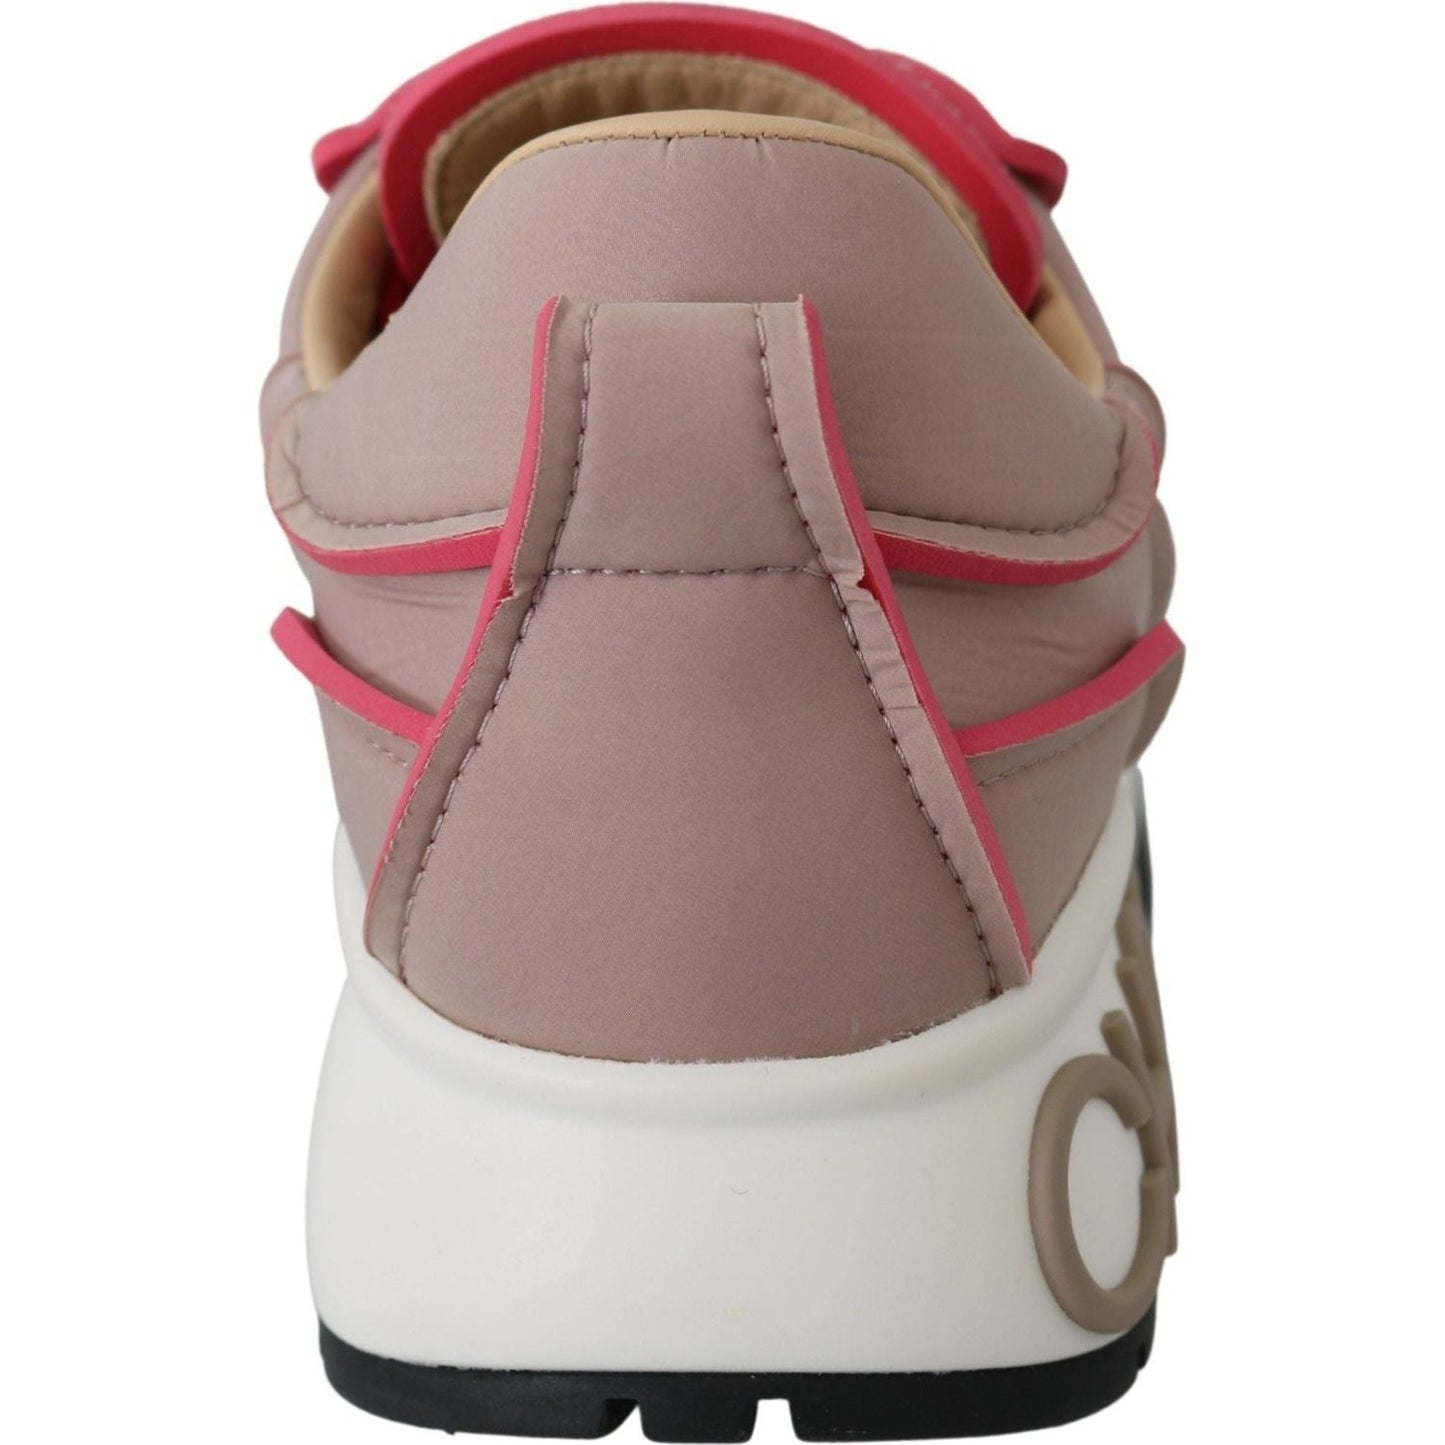 Jimmy Choo Ballet Pink Chic Padded Sneakers ballet-pink-and-red-raine-sneakers